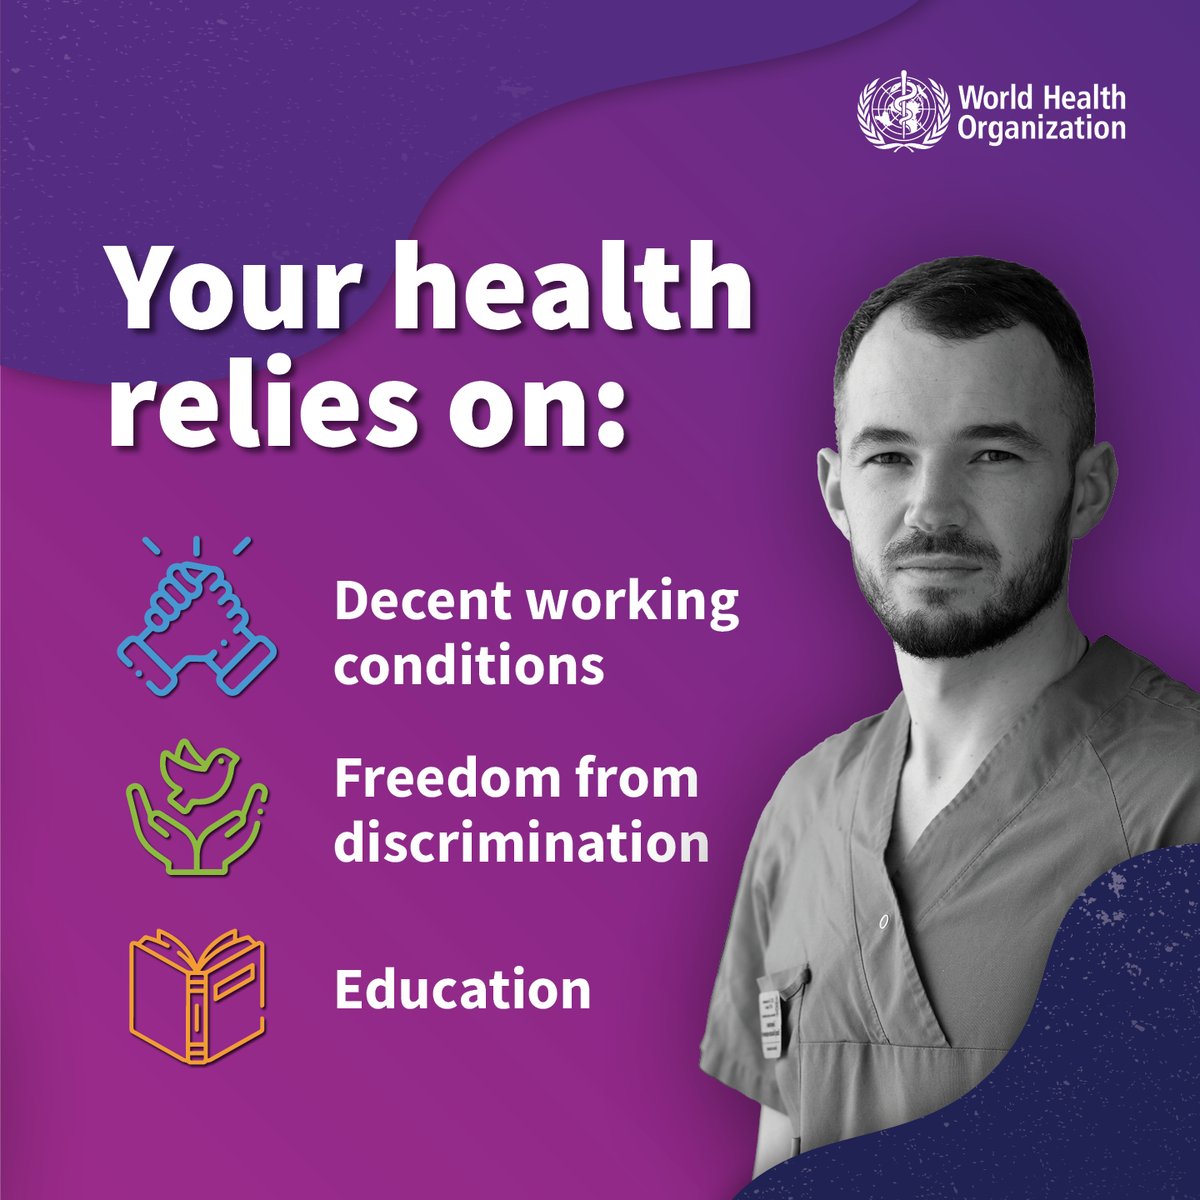 Health is included as a human right in the constitutions of 140 countries, yet billions are still denied this fundamental right in practice. It's time for action to bridge this gap. ☂️ This #WorldHealthDay and everyday, let’s fight for #MyHealthMyRight